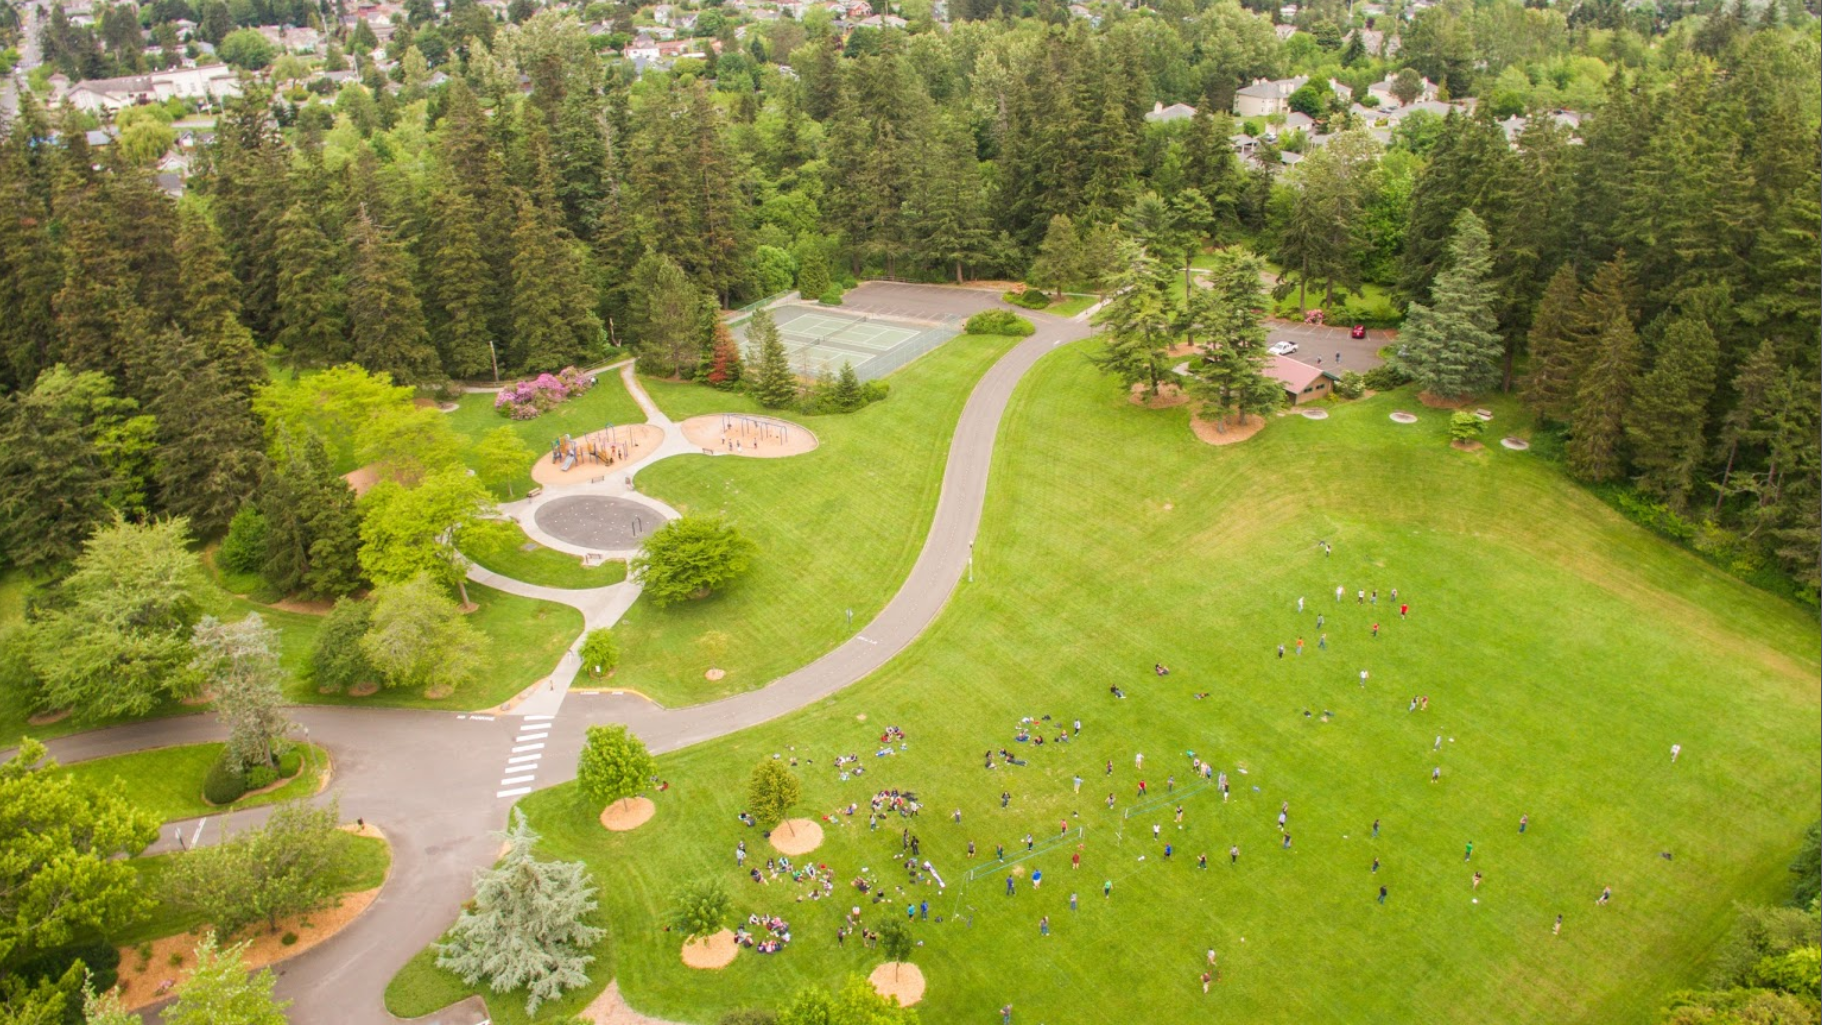 aerial view of Fairhaven Park: a playground and tennis courts on the left, lots of people enjoying a large grassy field on the right, and a shelter with parking lot at the far edge